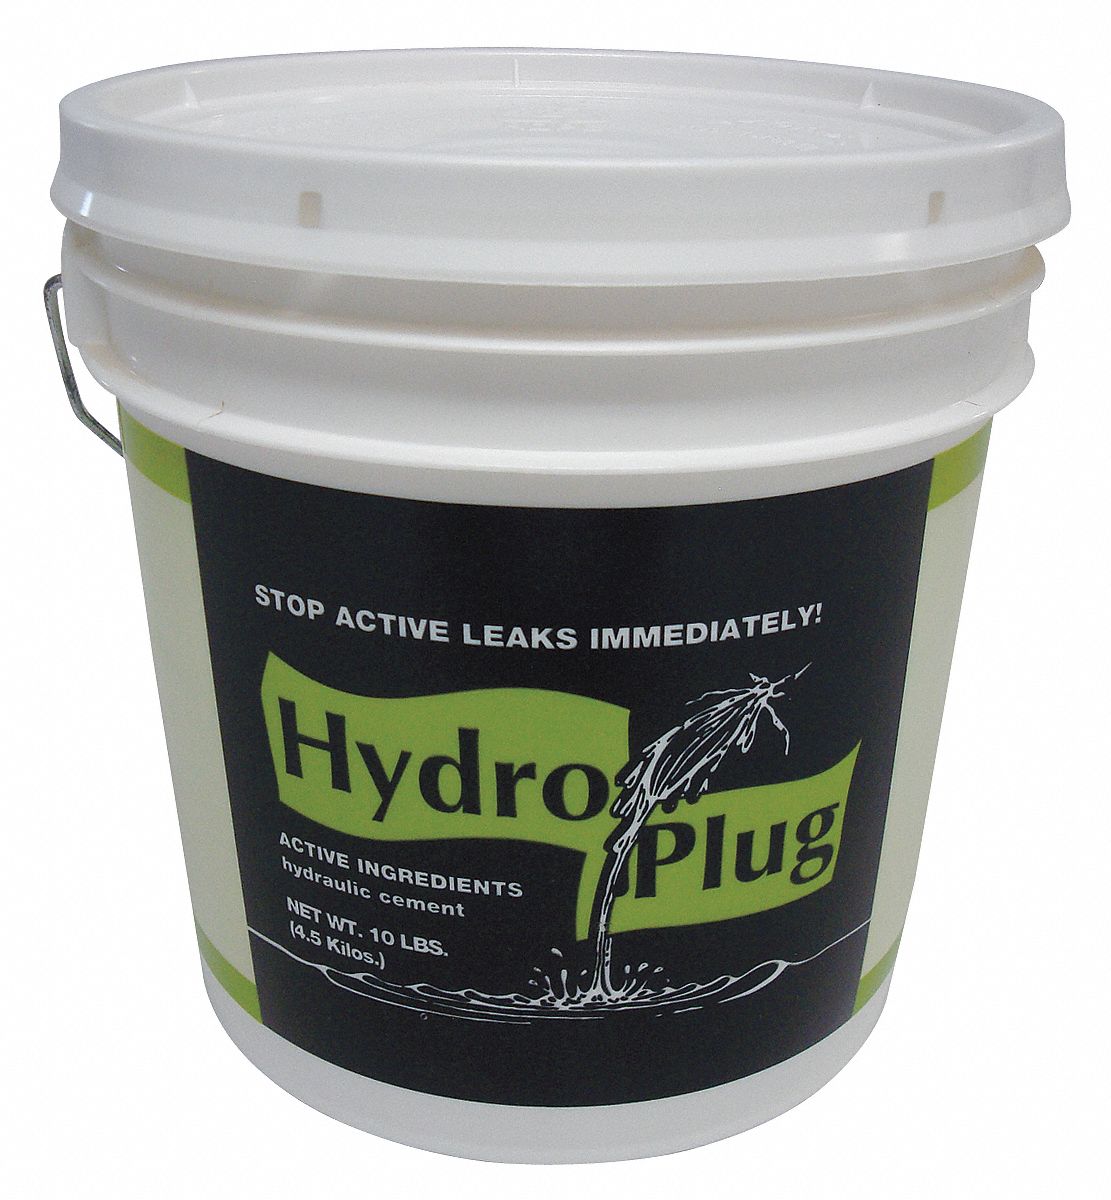 Hydraulic Cement: Hydroplug, Cement, 10 lb Container Size, Pail, Gray